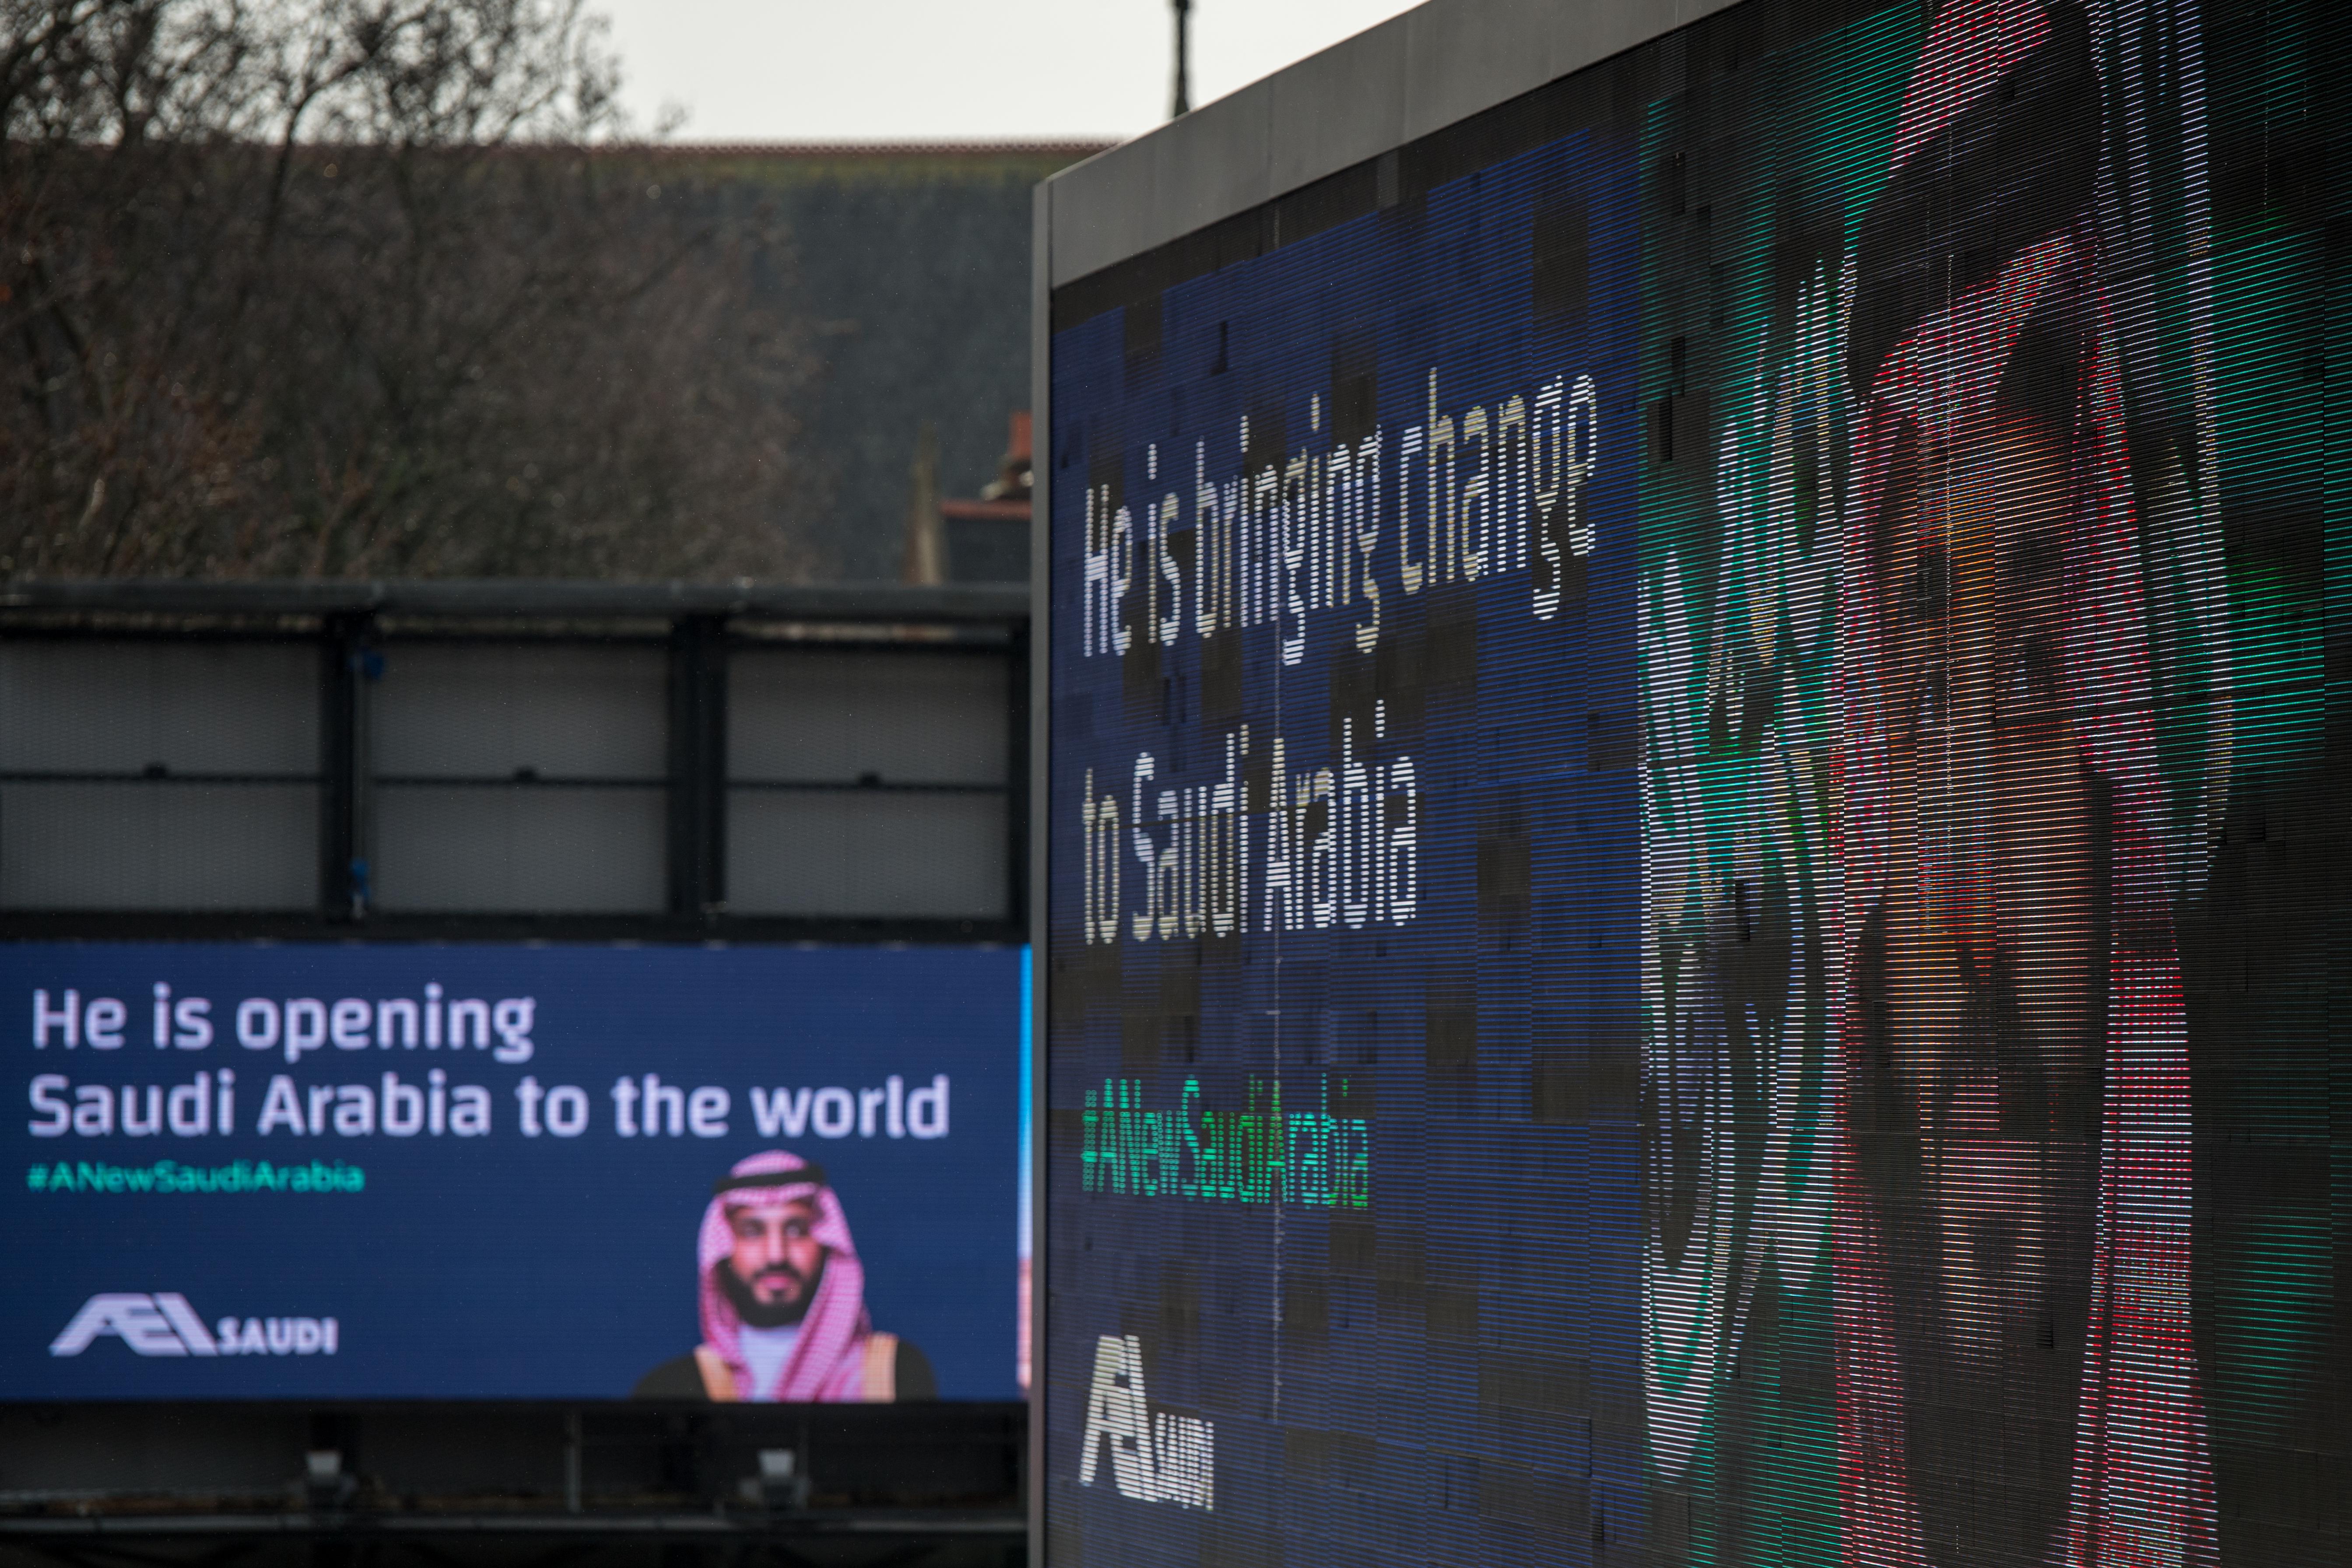 Electronic billboards show adverts for Saudi Crown Prince Mohammed bin Salman with the hashtag '#ANewSaudiArabia' on March 7, 2018 in London, England.